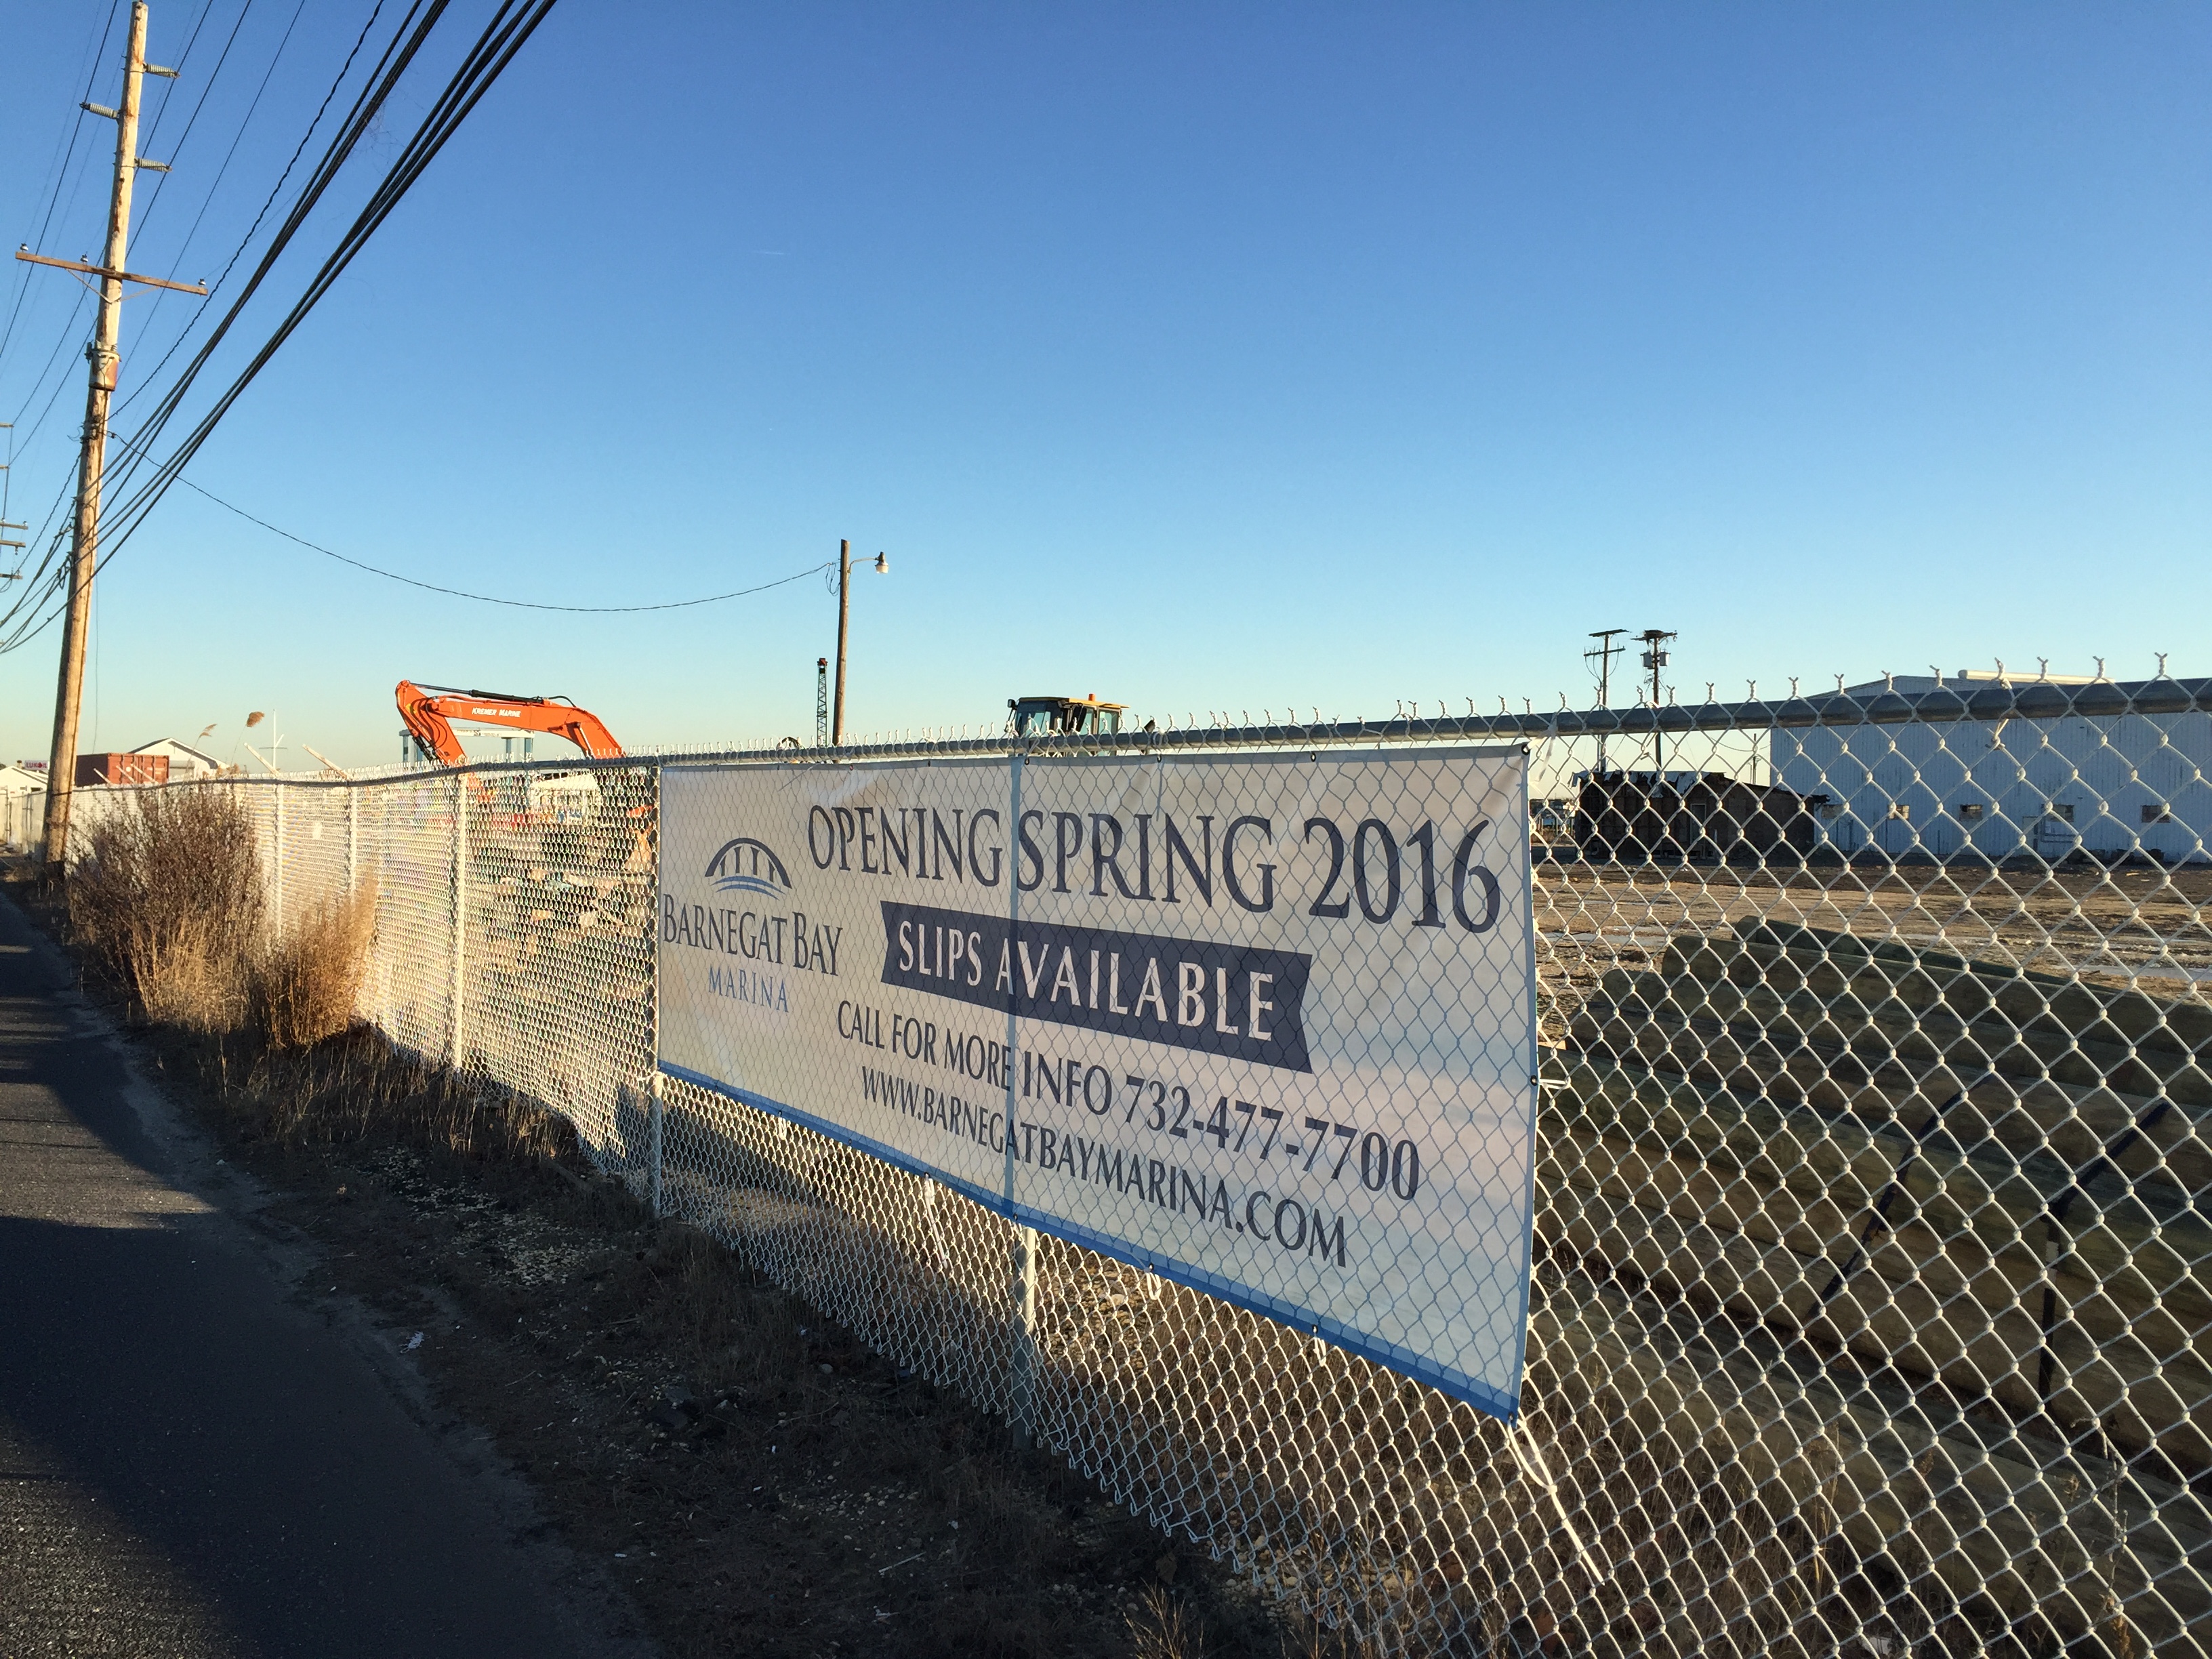 Barnegat Bay Marina will open at the former Hinckley Yacht Services property this spring. (Photo: Daniel Nee)